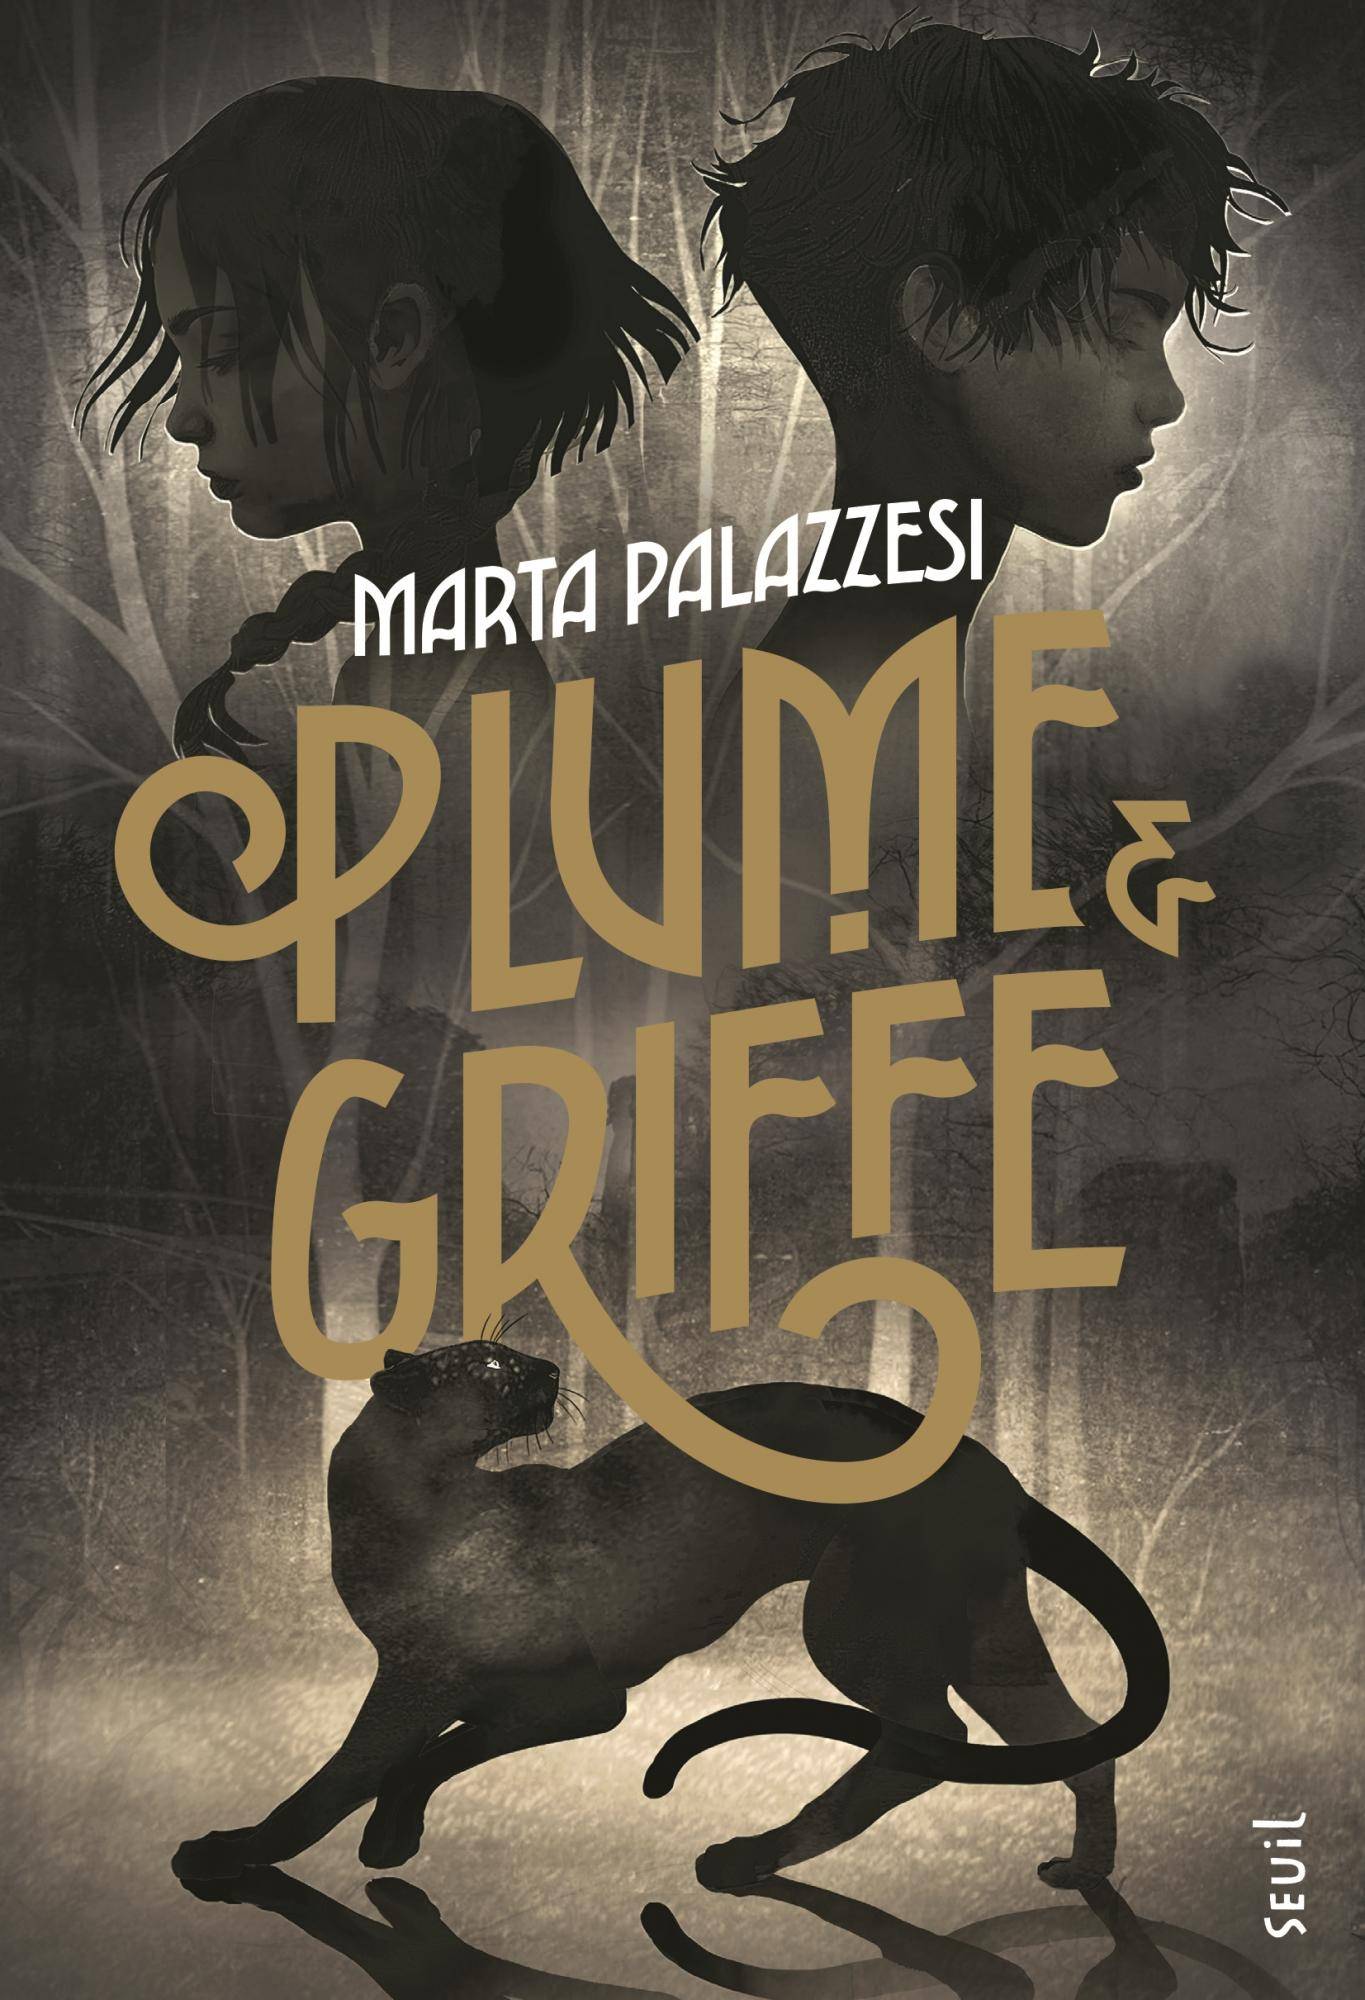 Plume & Griffe